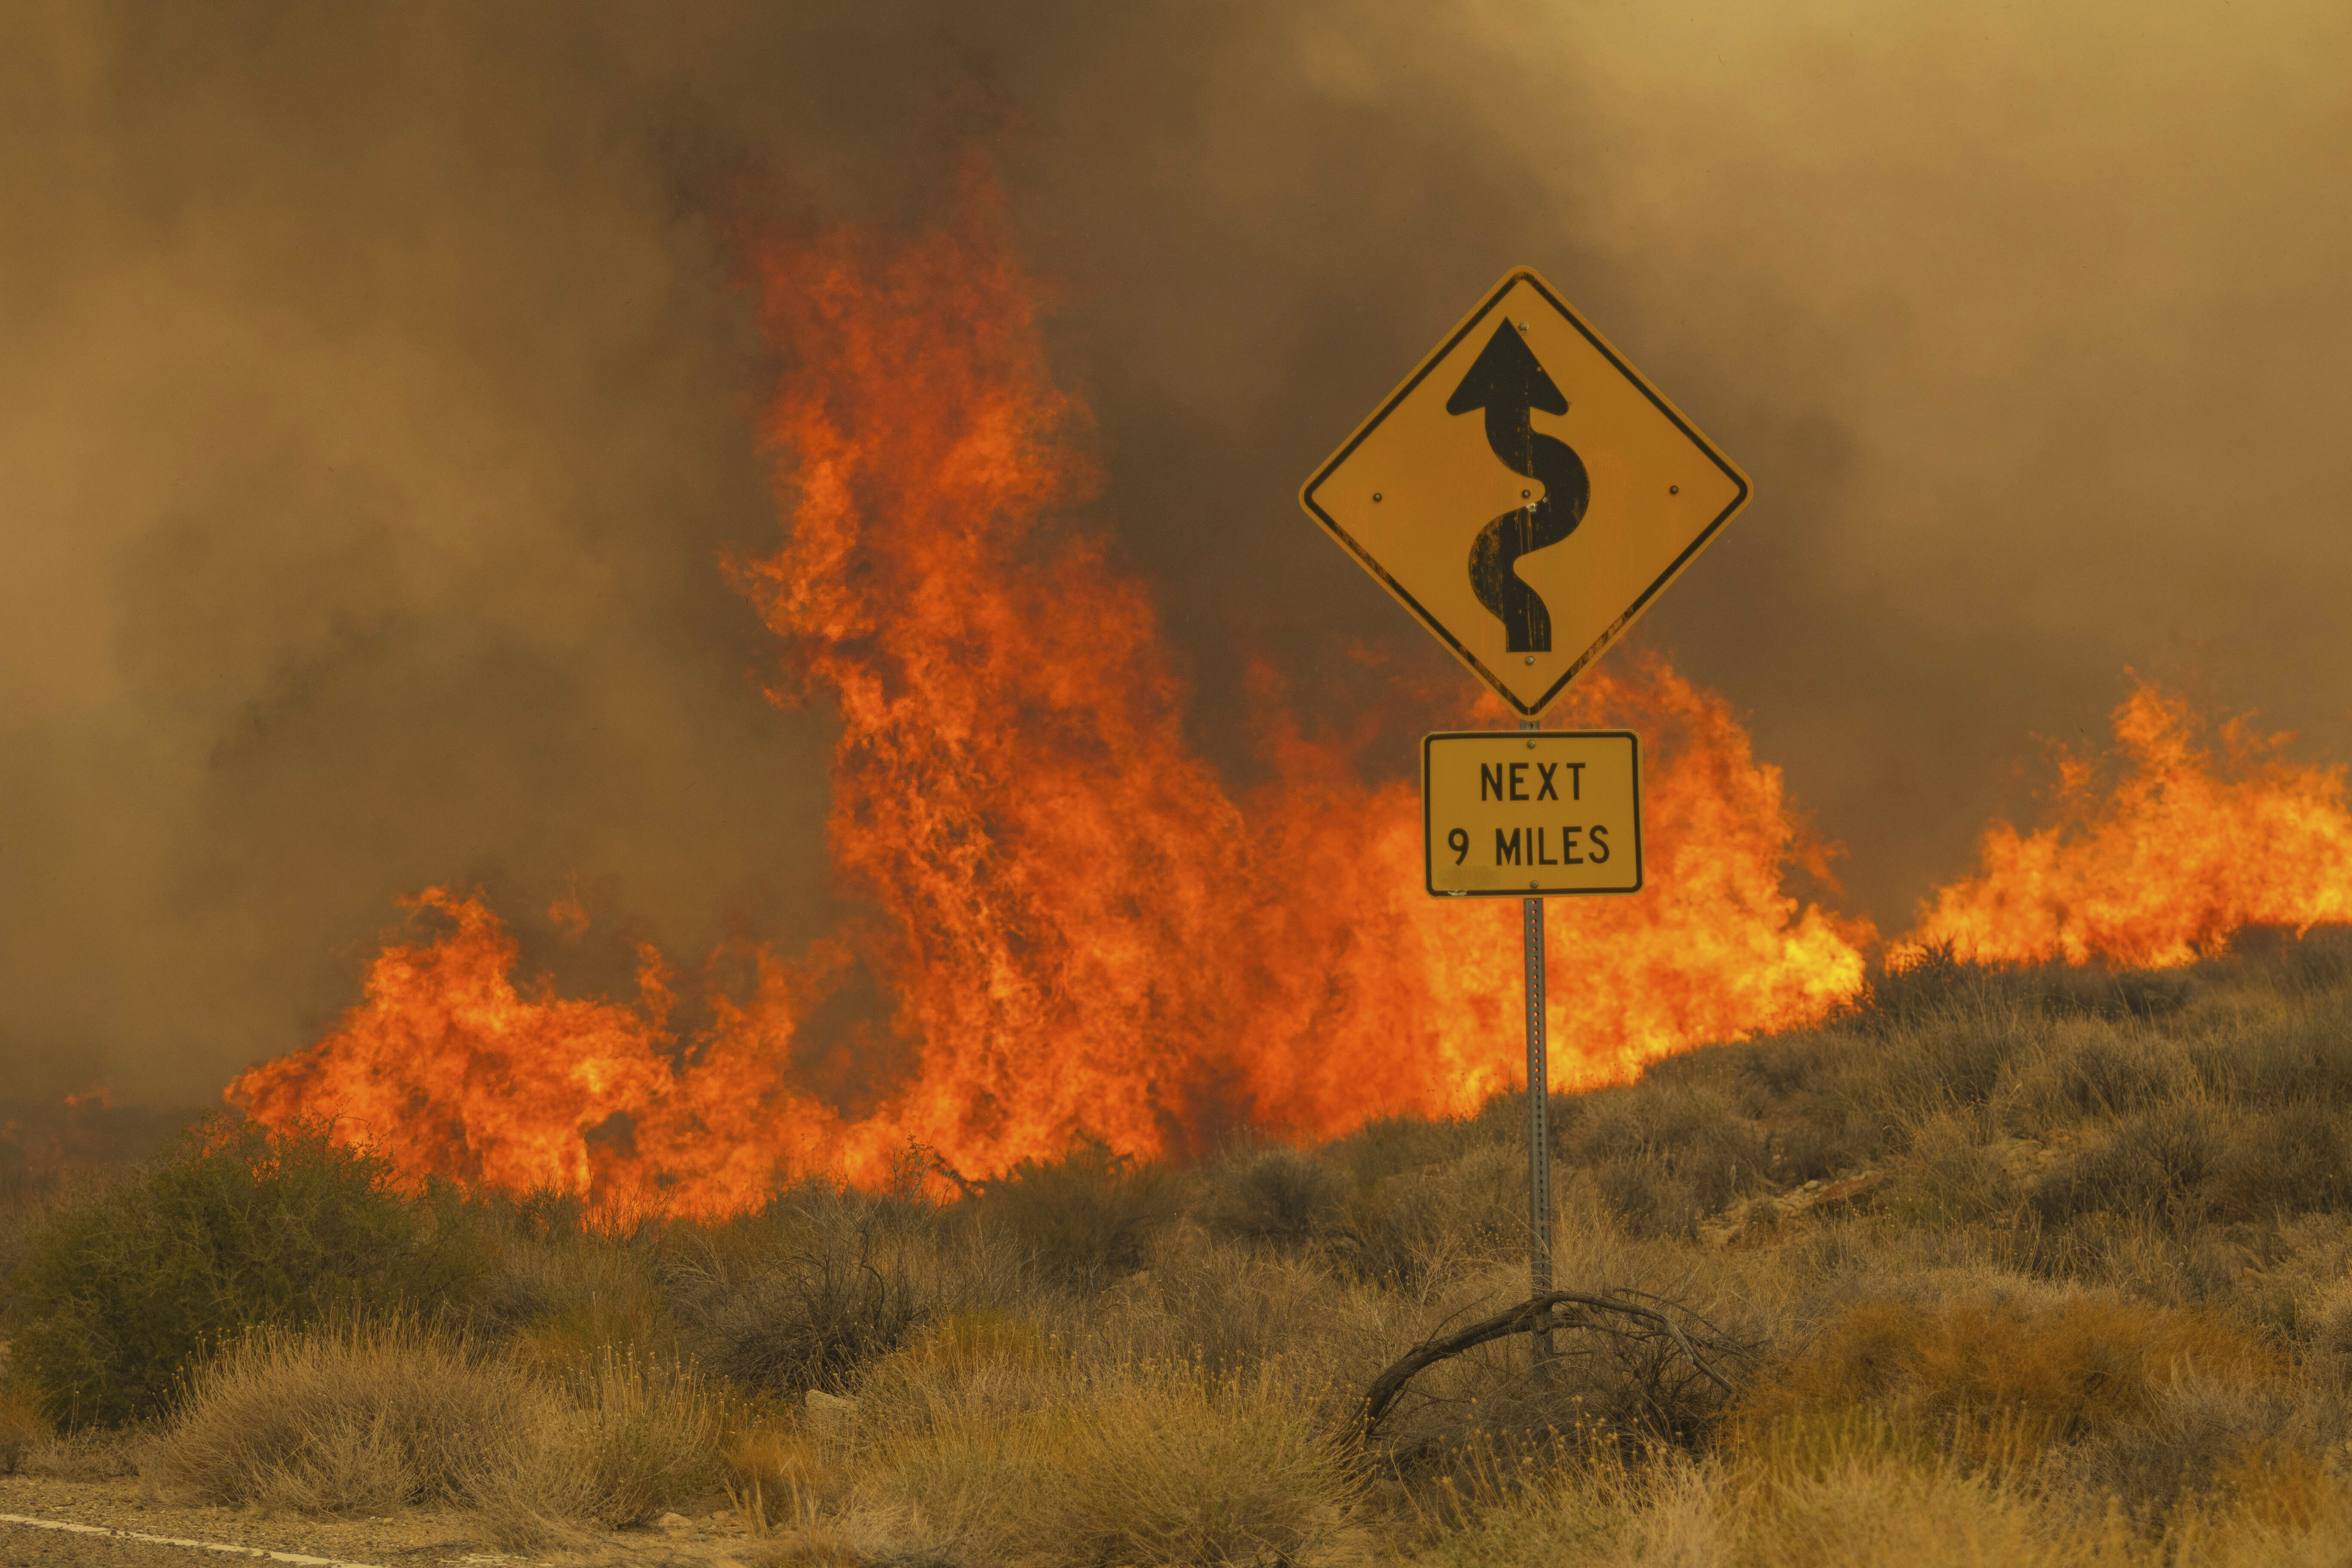 Flames rise from the York Fire on Ivanpah Rd. on Sunday, July 30, 2023, in the Mojave National Preserve, Calif. The York Fire has burned over 77,000 acres and has 0% containment. (AP Photo/Ty ONeil)